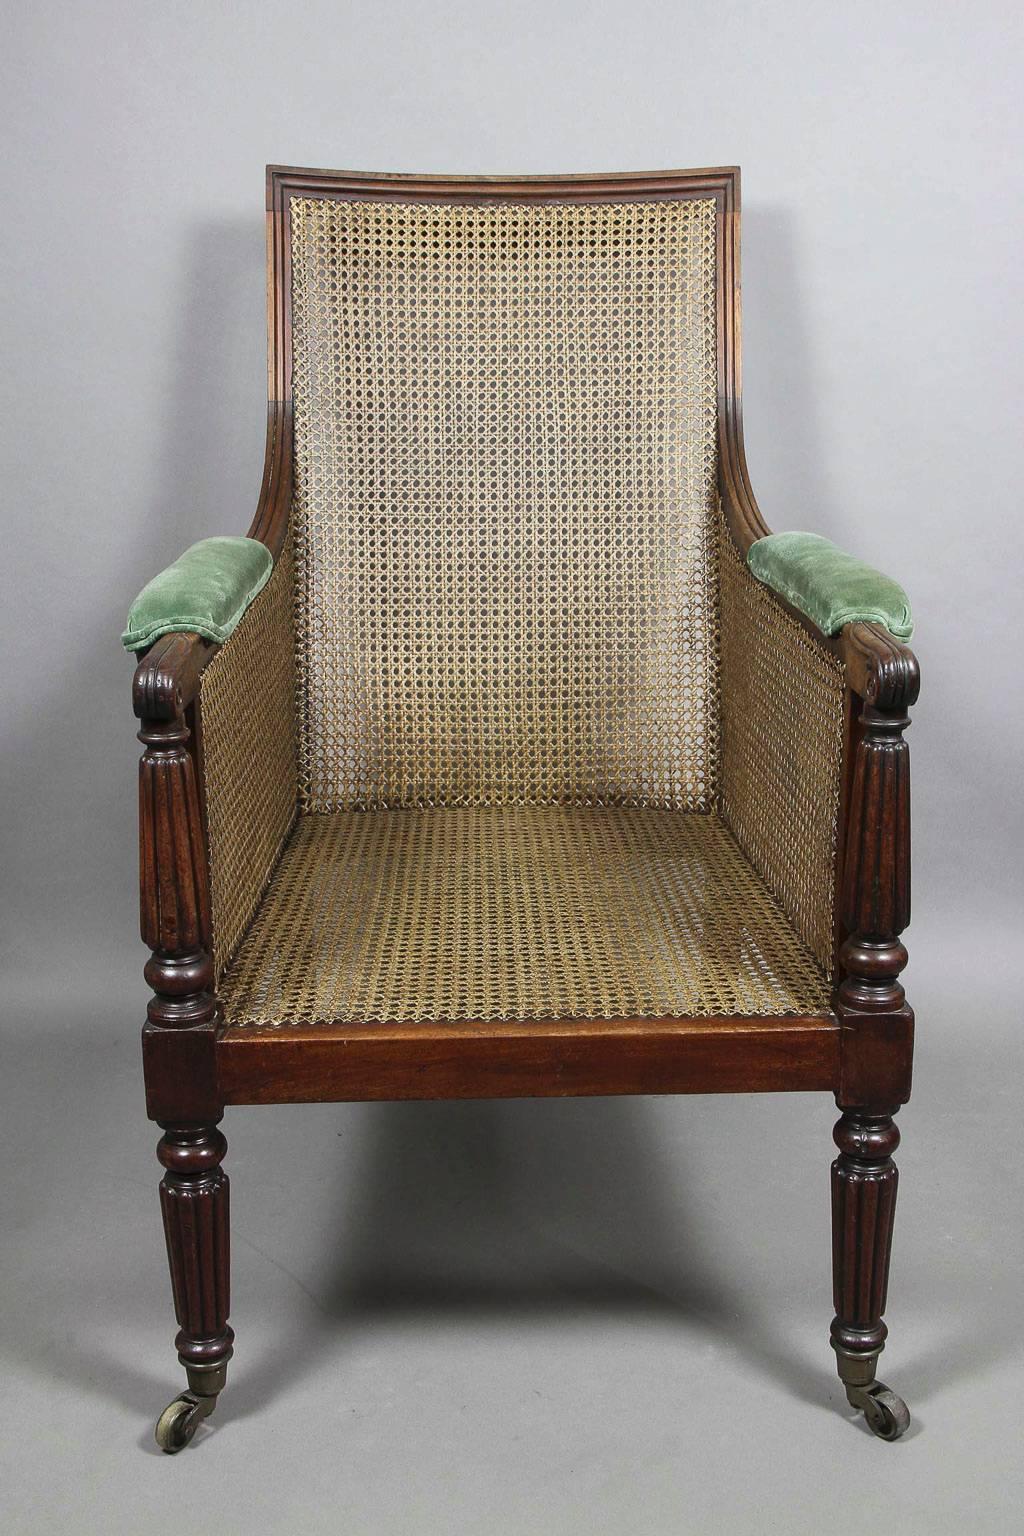 Rectangular molded and reeded frame, all newly caned, down swept arms with lotus leaf carved ends supported on reeded supports, raised on reeded tapered legs and casters.